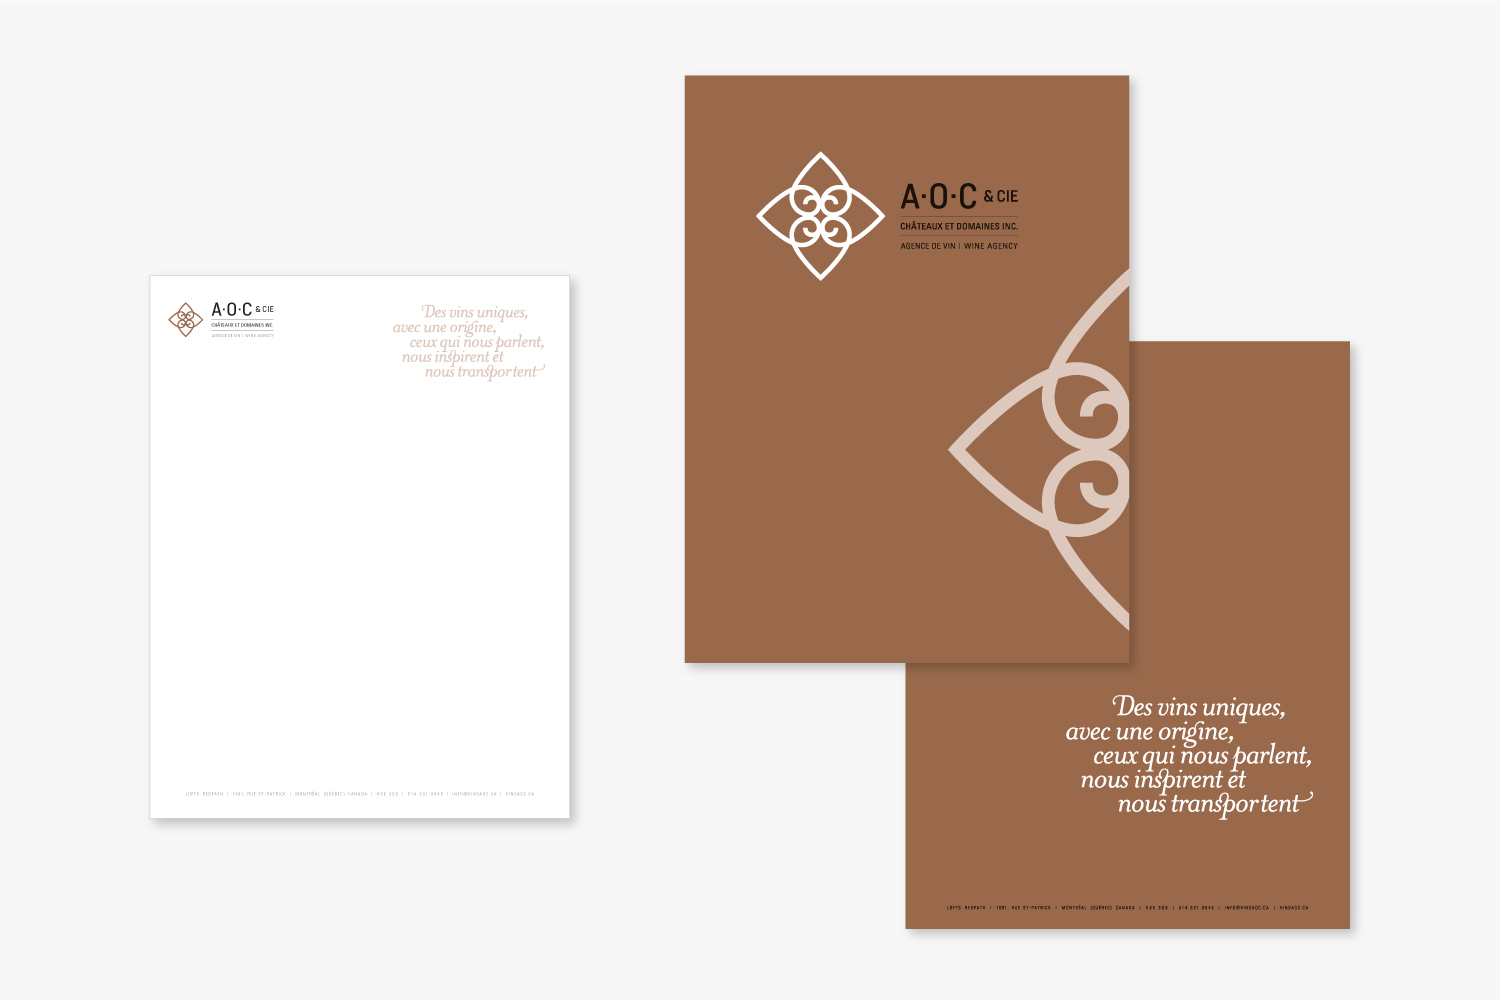 A.O.C. & CIE – Wine Agency – Identity, Web & Typography by Isabelle Robida – Infrarouge [Design & Culture] – 2015